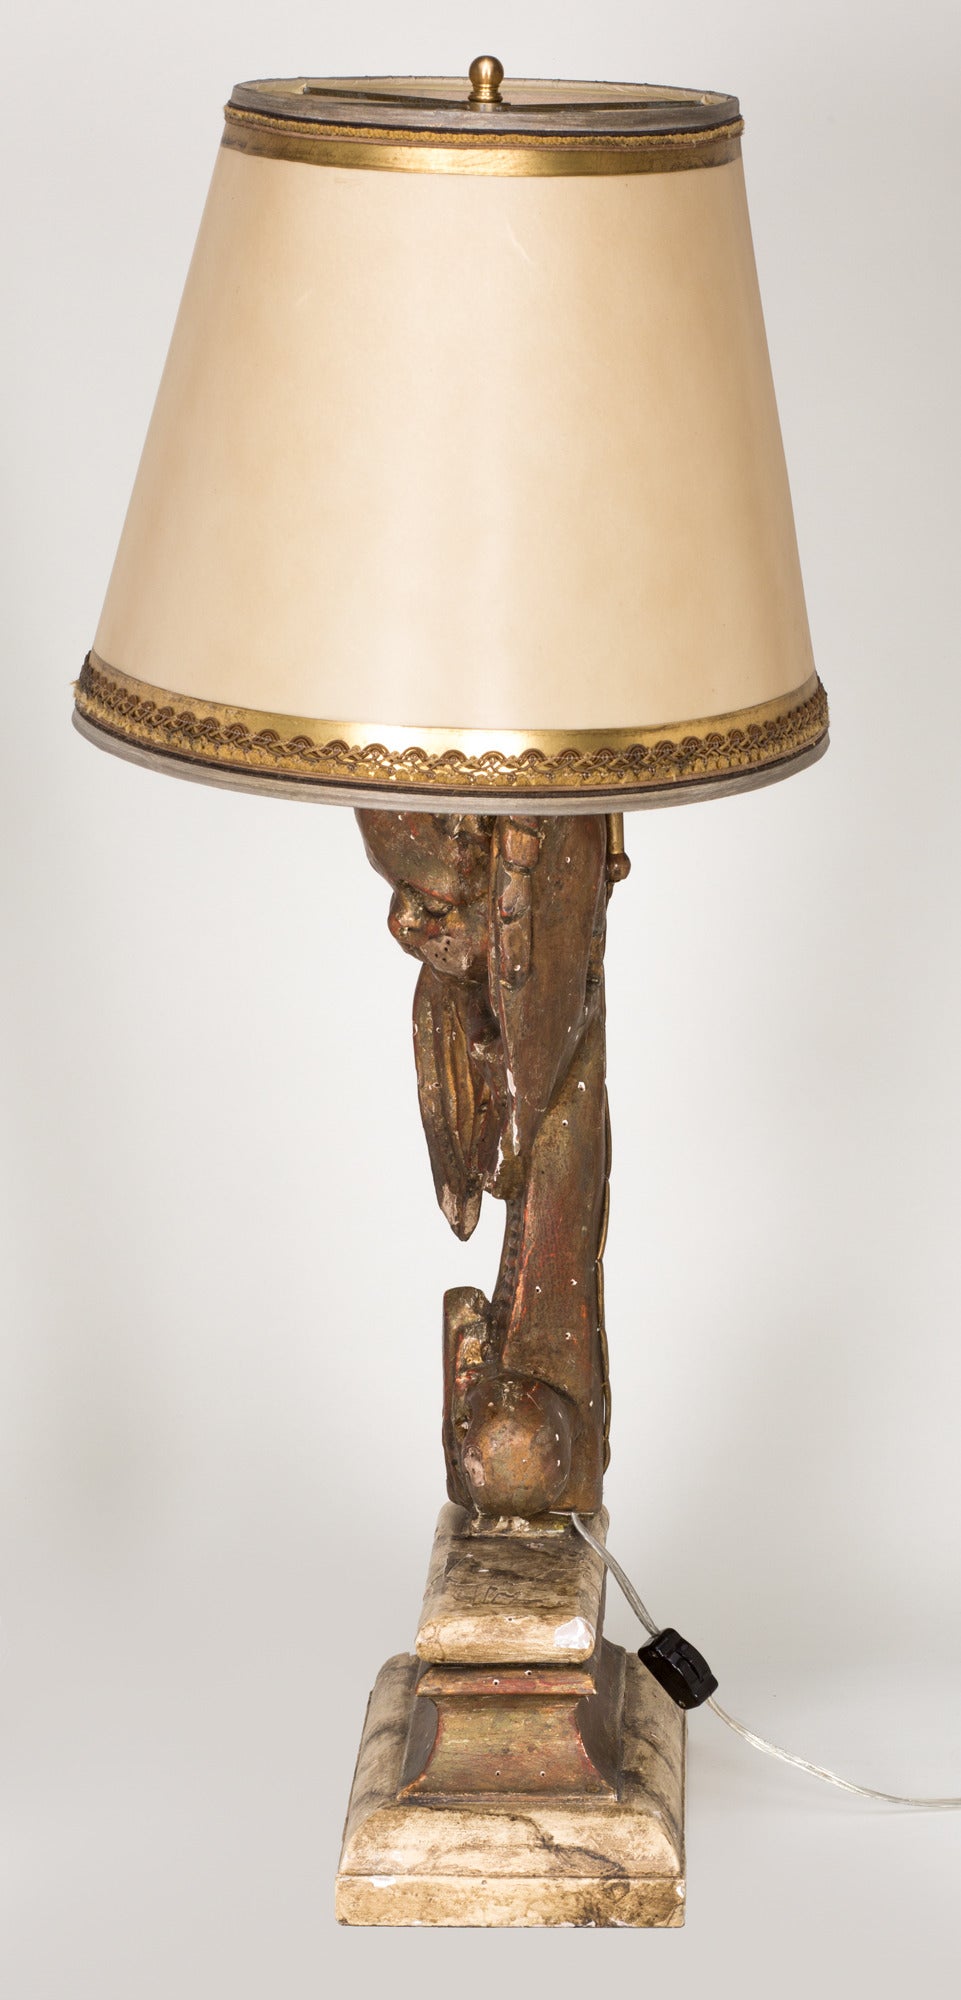 Pair of Italian Cherub Lamps, circa 1860 In Excellent Condition For Sale In Summerland, CA